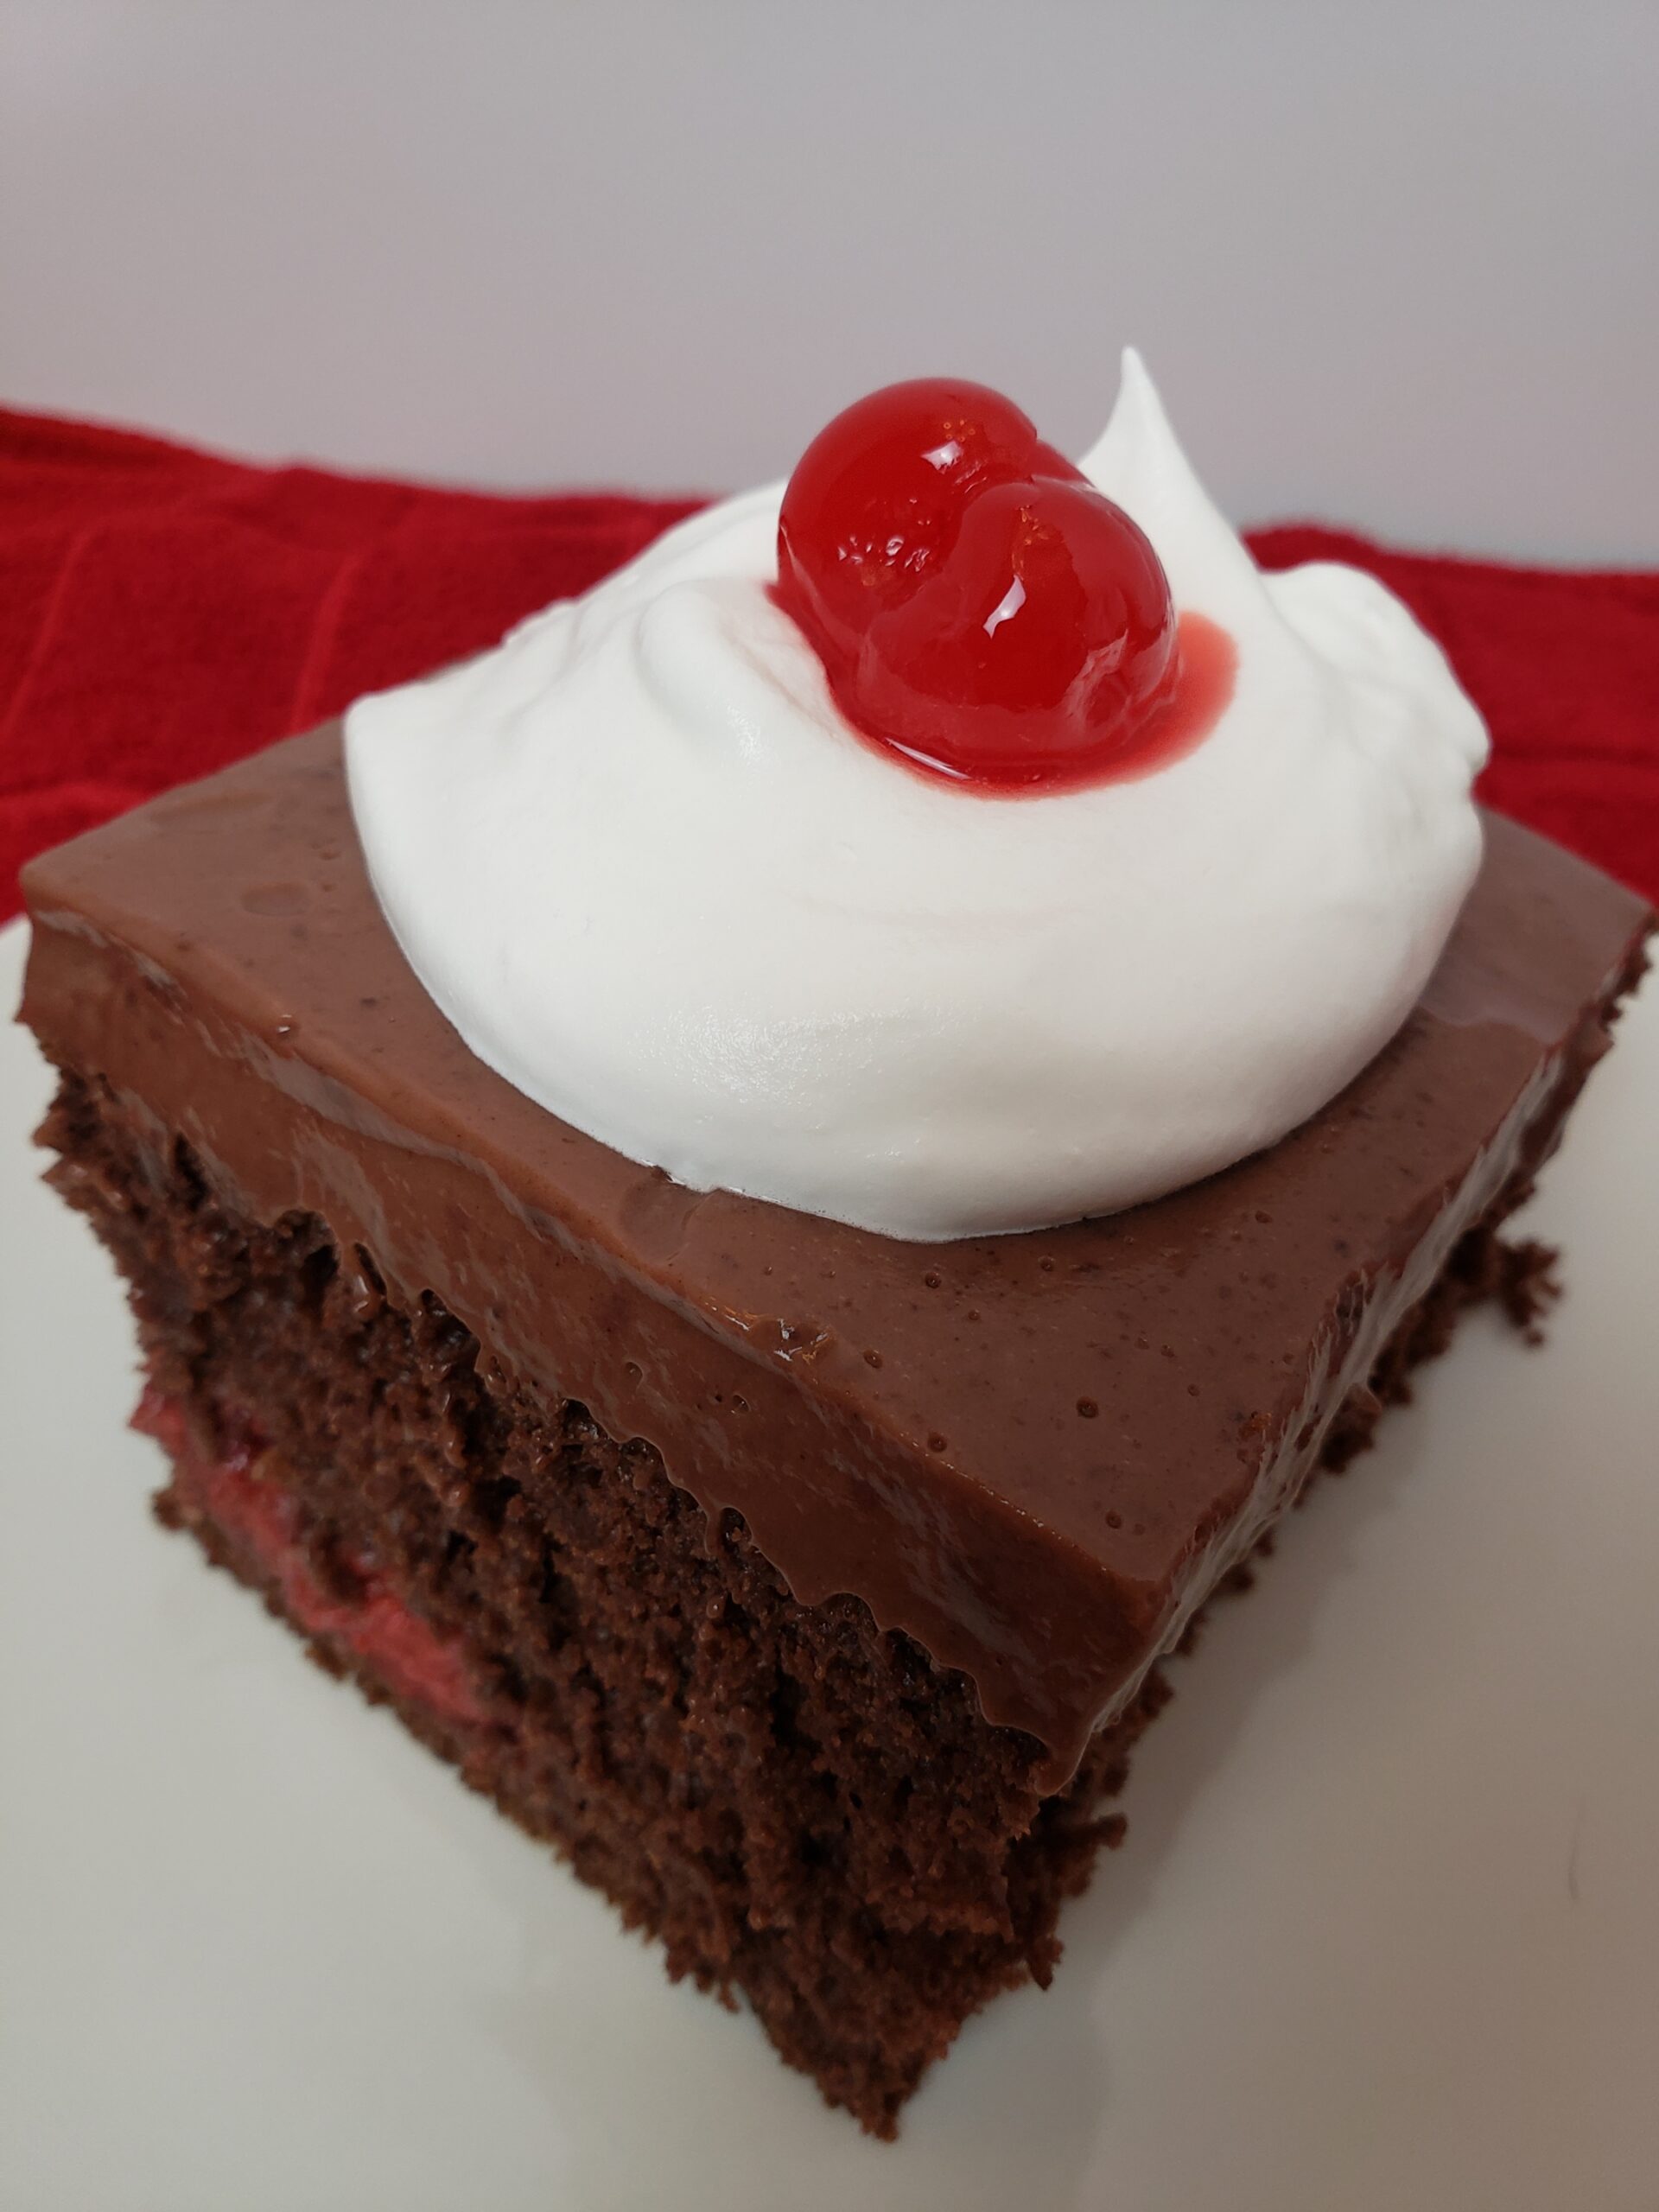 Cherry Chocolate Cake without optional cool whip and cherries